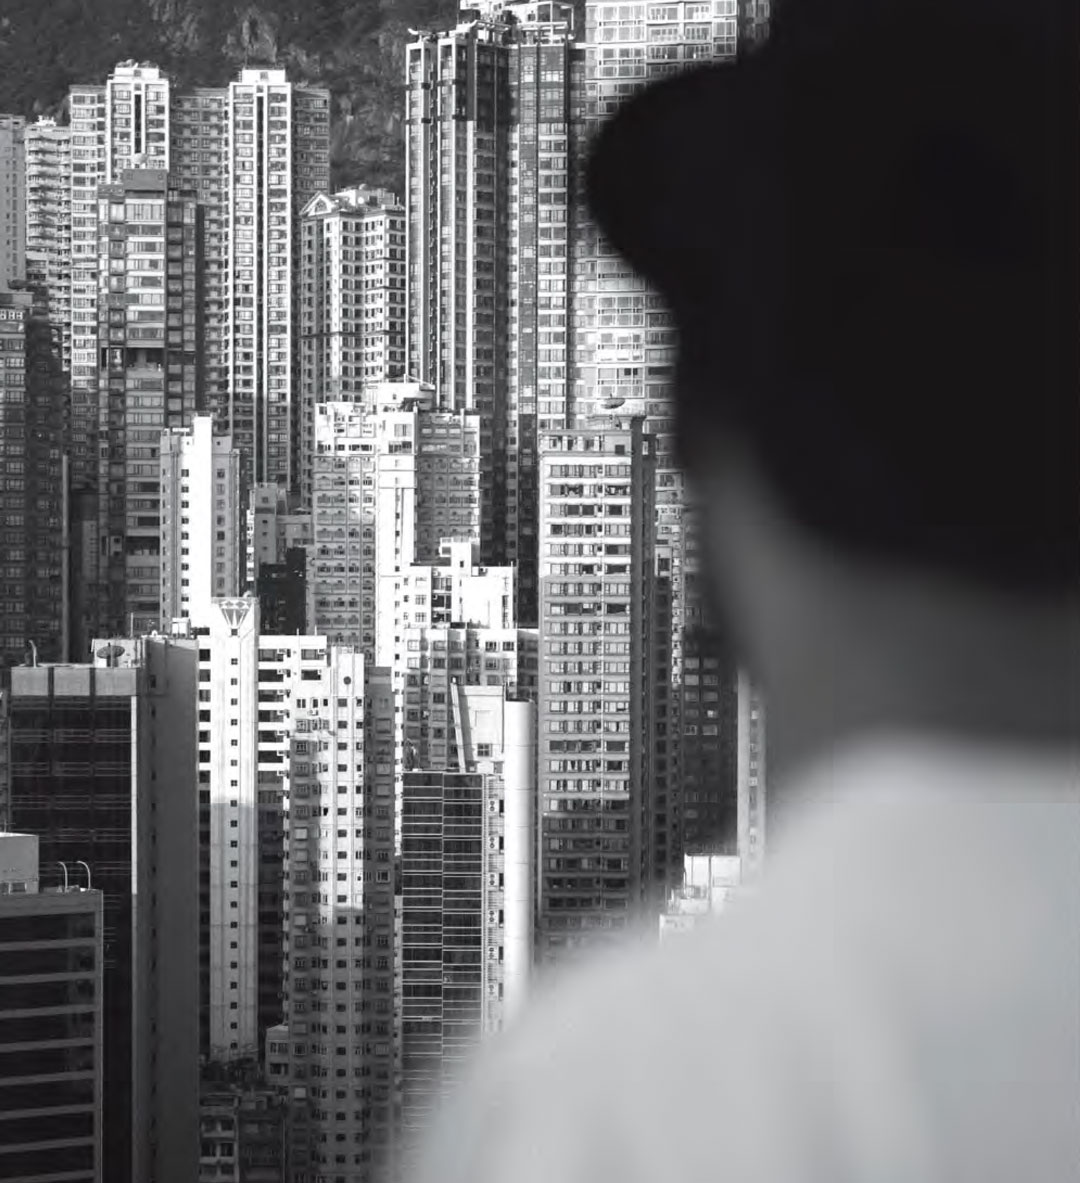 JR surveying the cityscape in our book JR: Can Art Change the World?